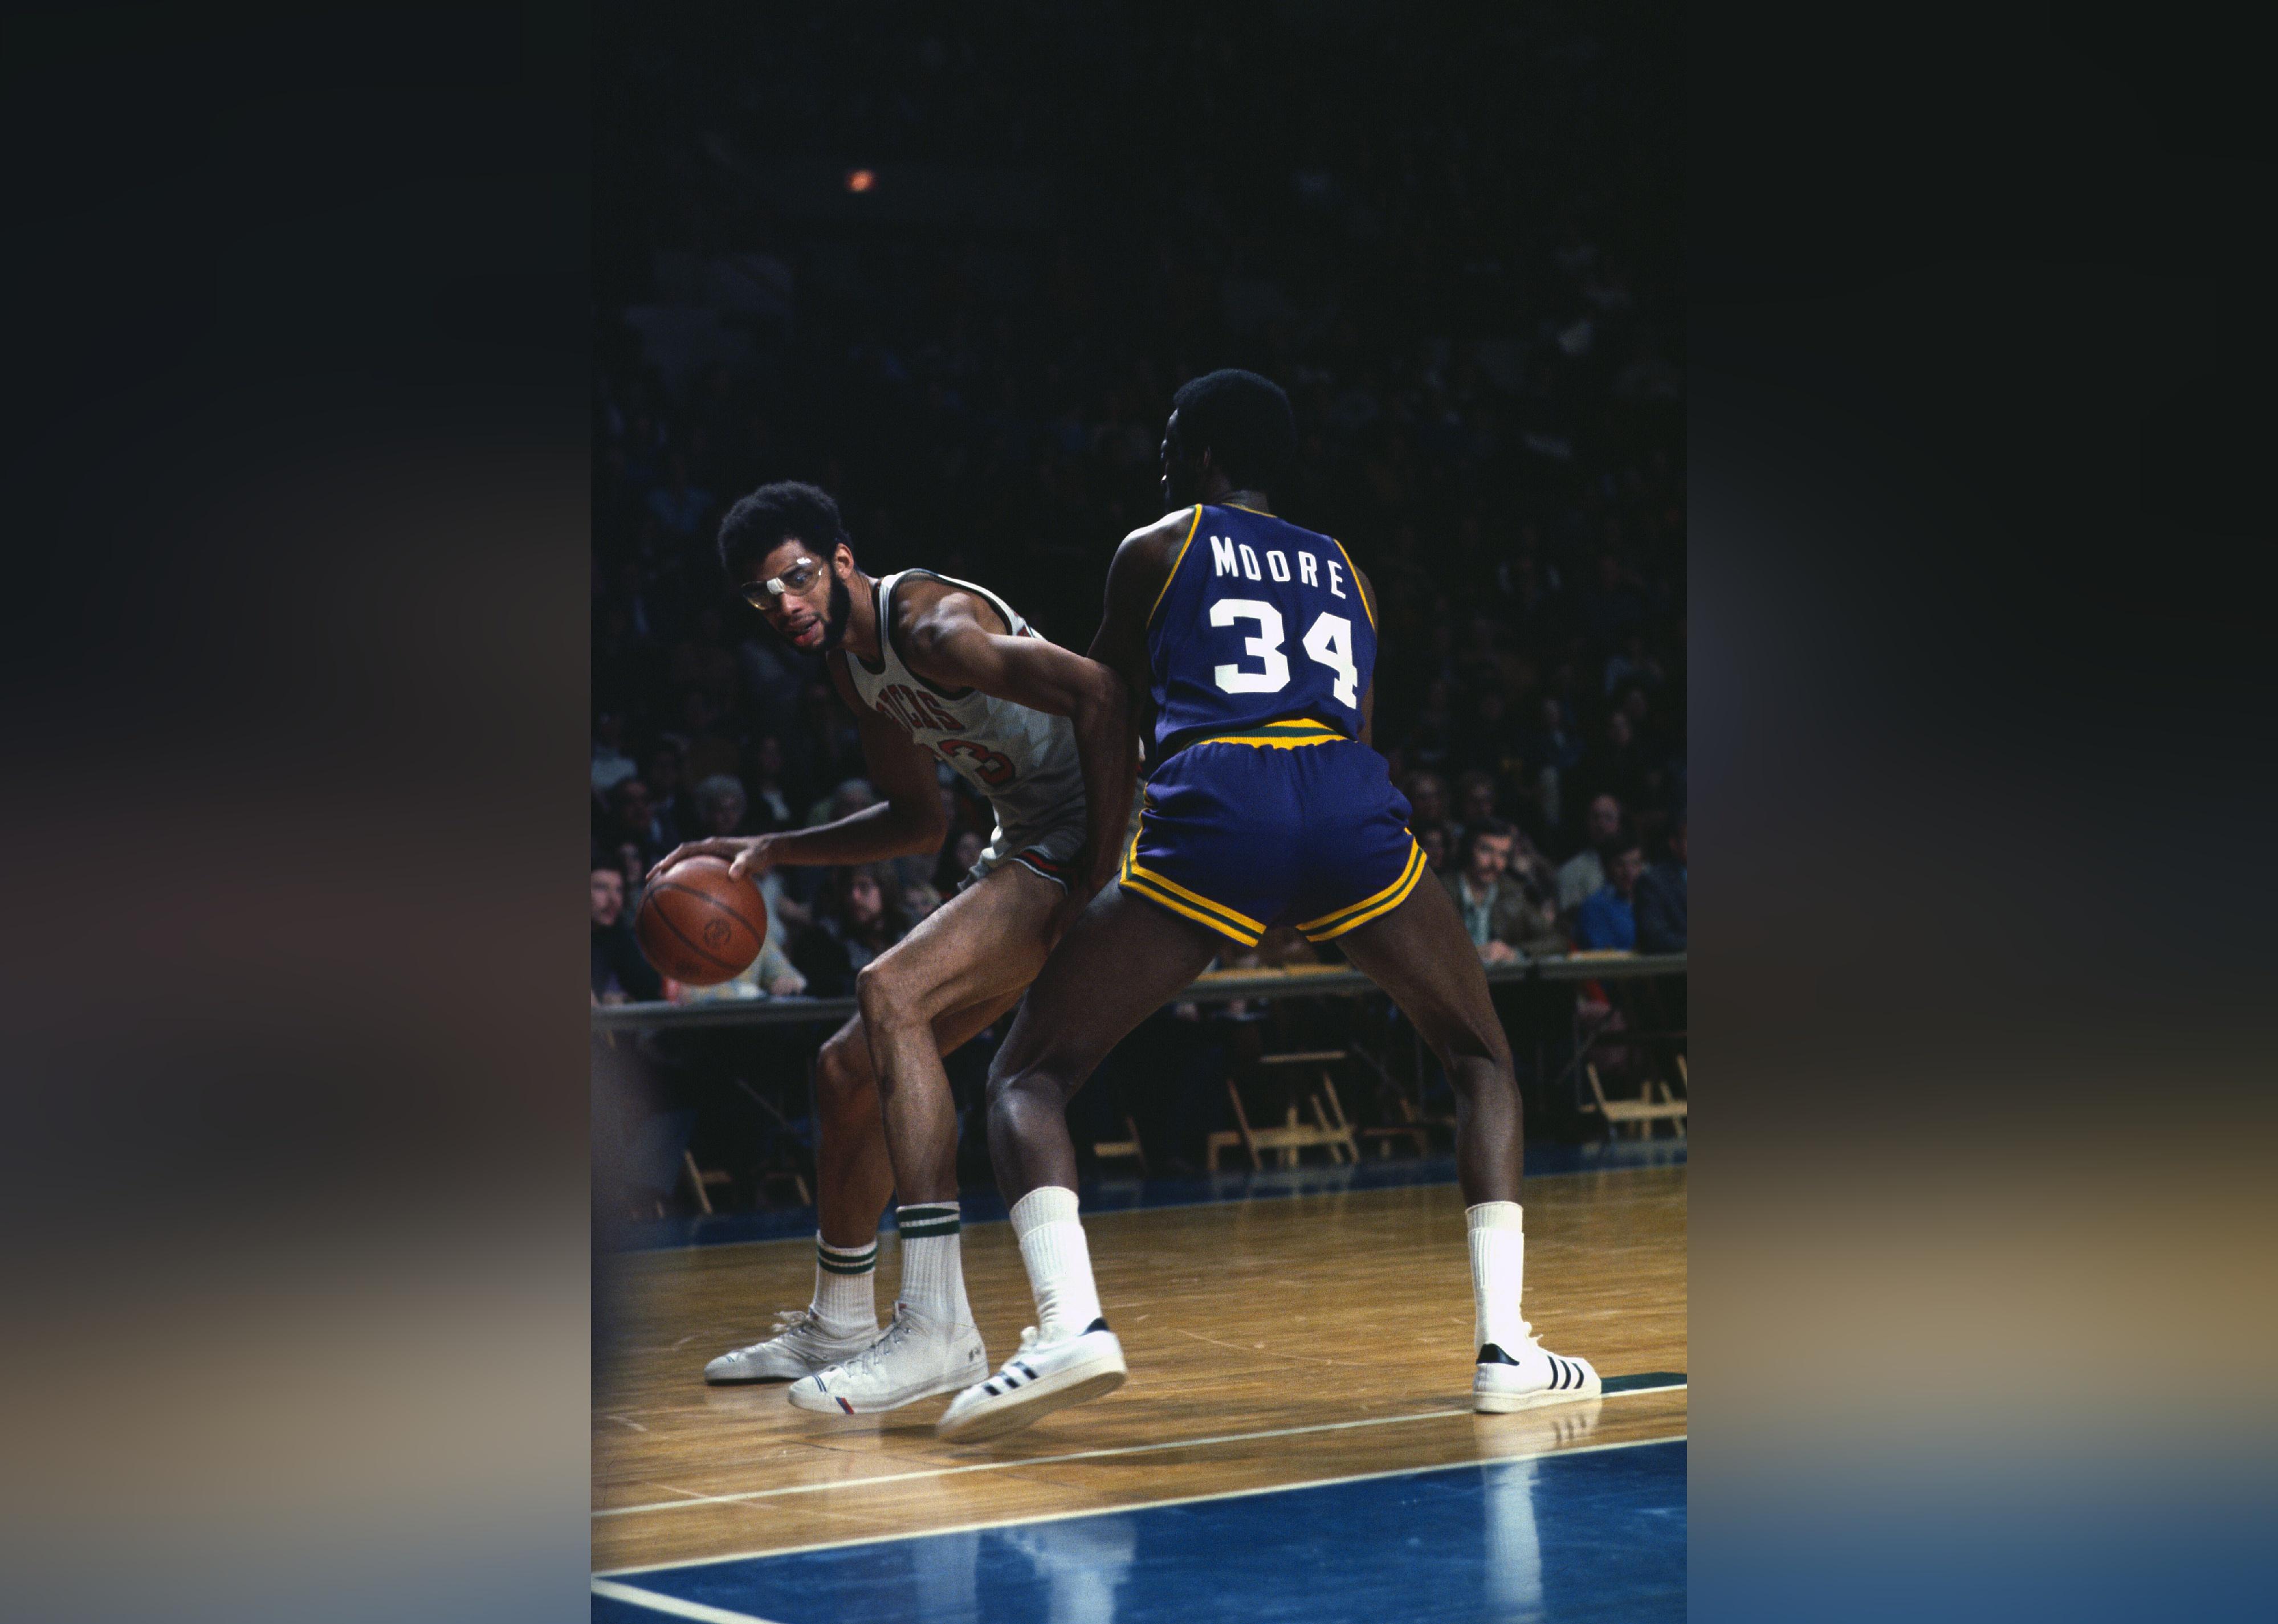  Kareem Abdul-Jabbar dribbles the ball backing in on Otto Moore of the New Orleans Jazz.